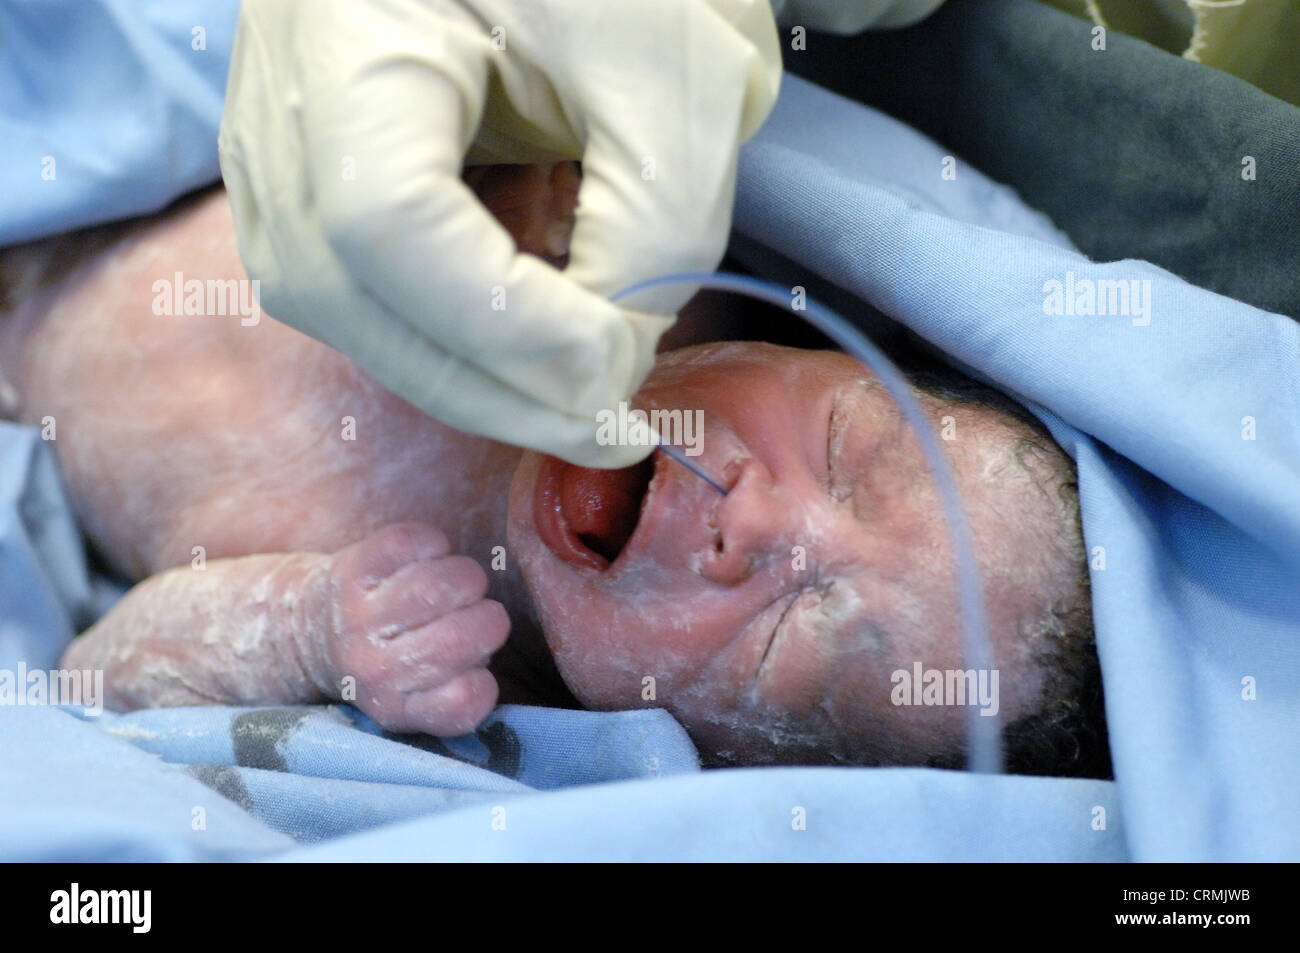 A gloved hand place a small suction into the mouth of a new born baby, to remove unwanted mucus. Stock Photo